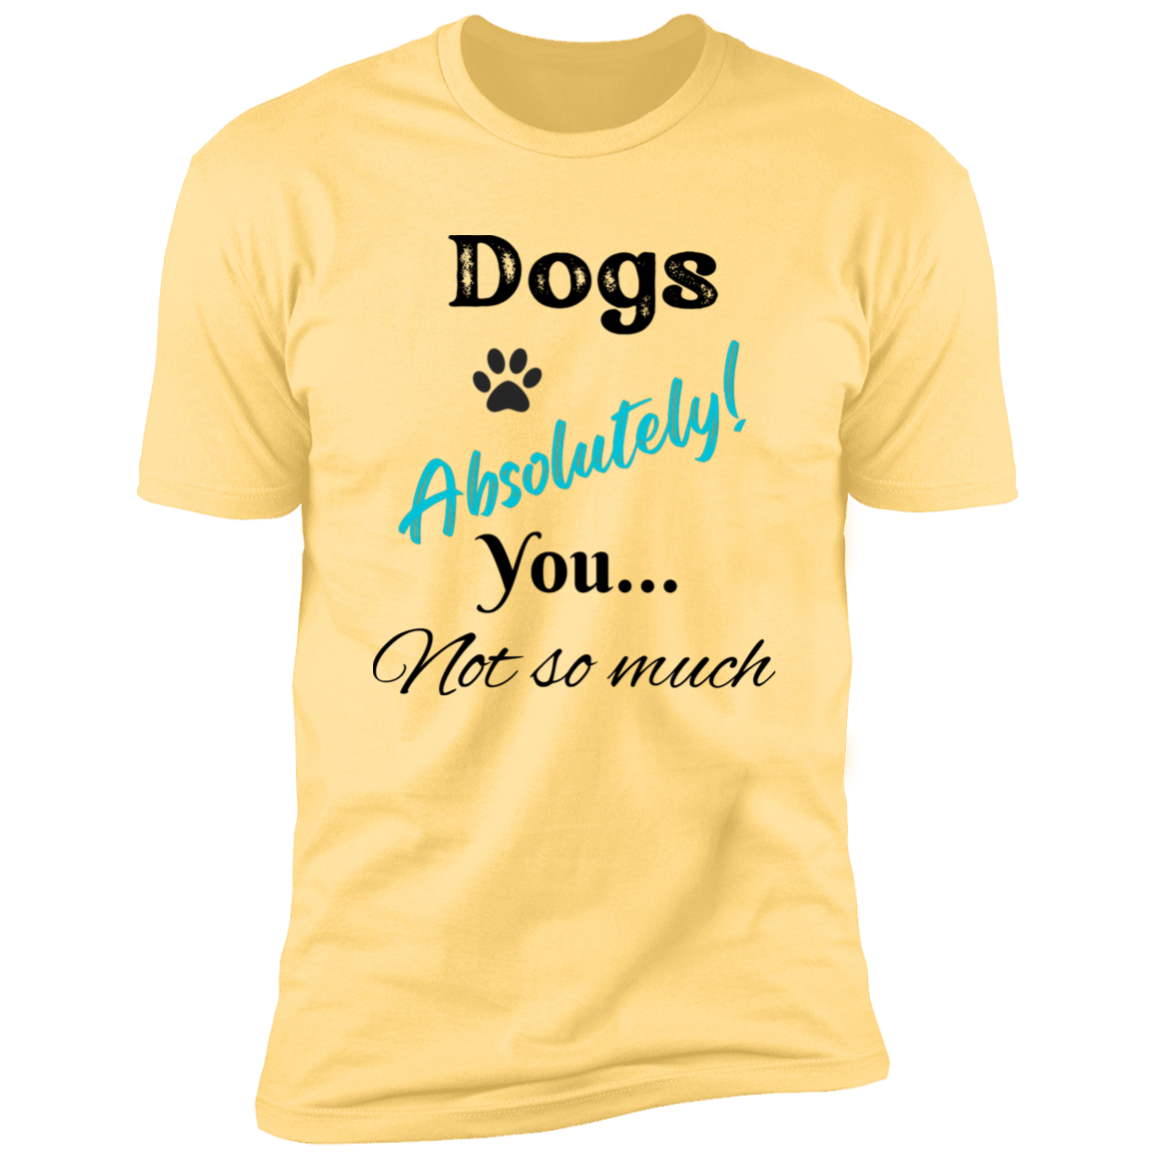 Dogs Absolutely! You Not So Much T-shirt, funny dog shirt dog shirt for humans, in banana cream